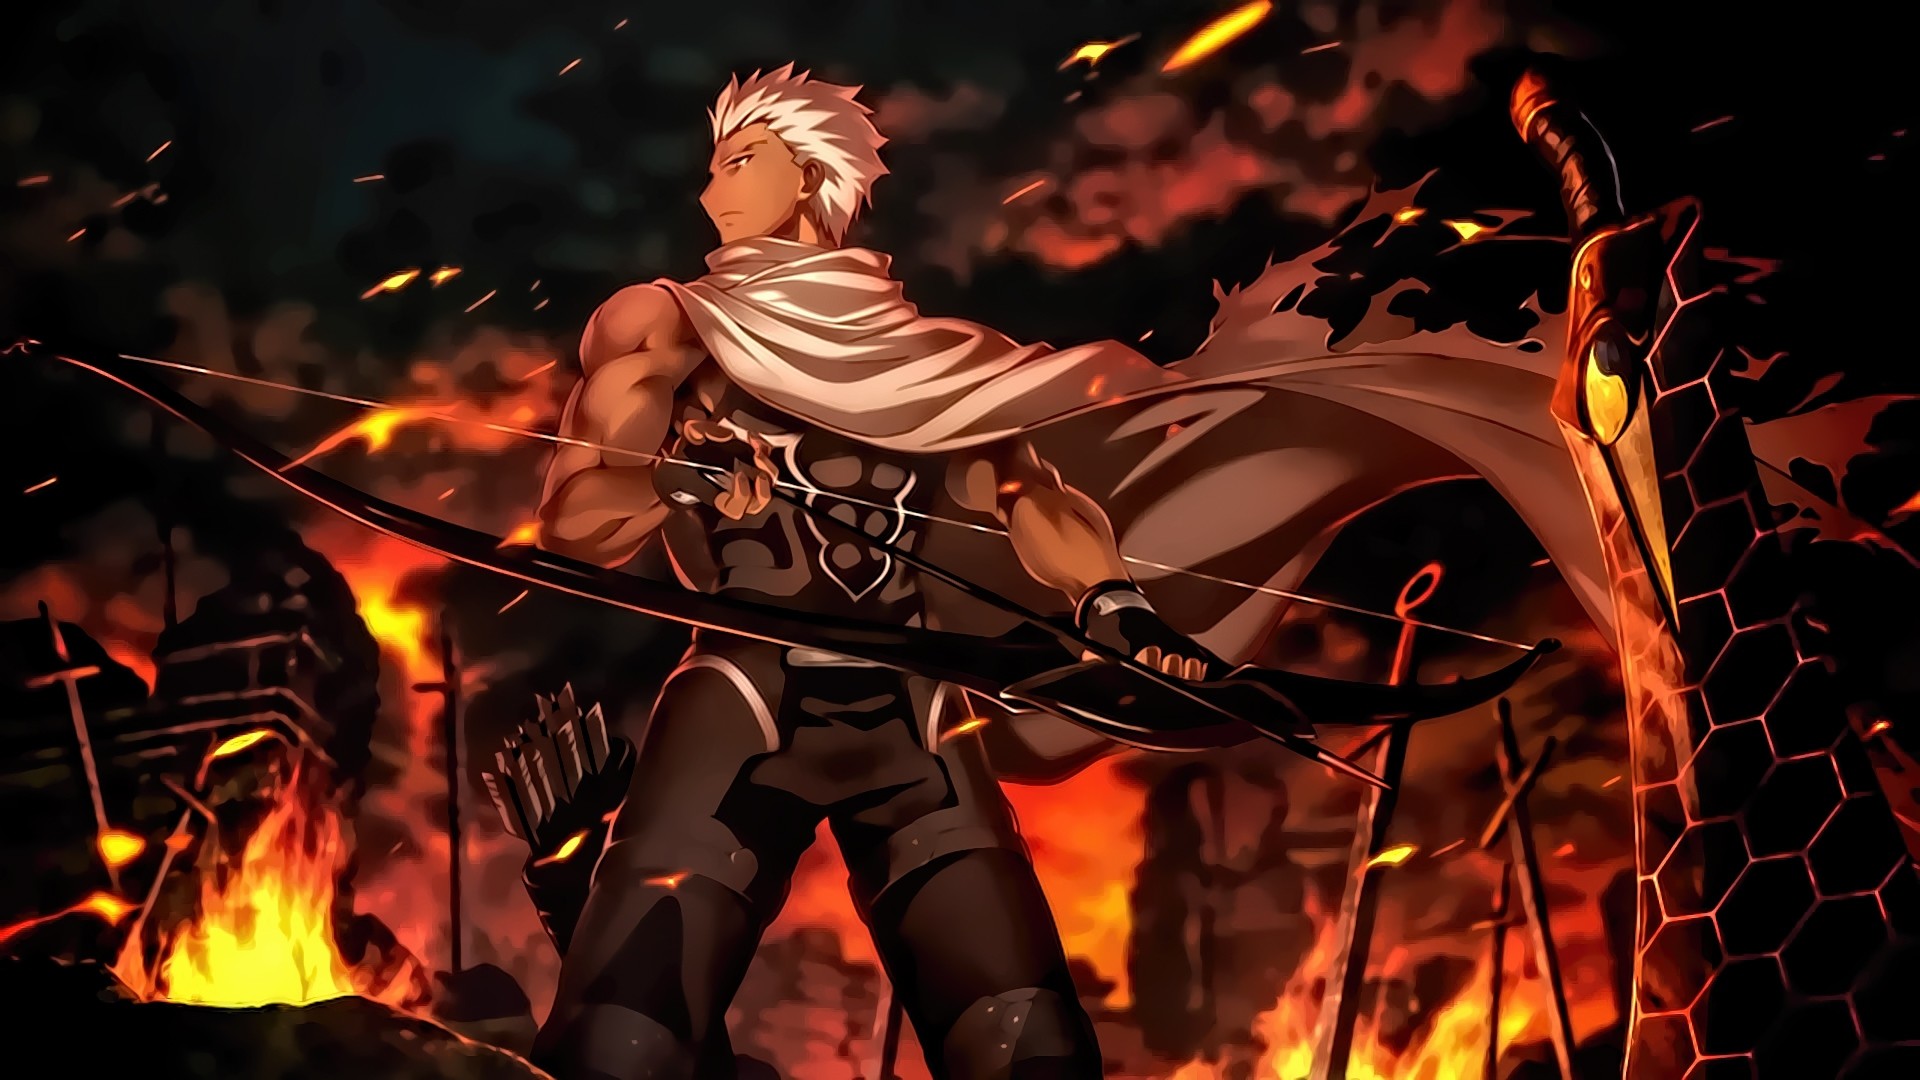 Fate / stay night Unlimited Blade Works Wallpapers